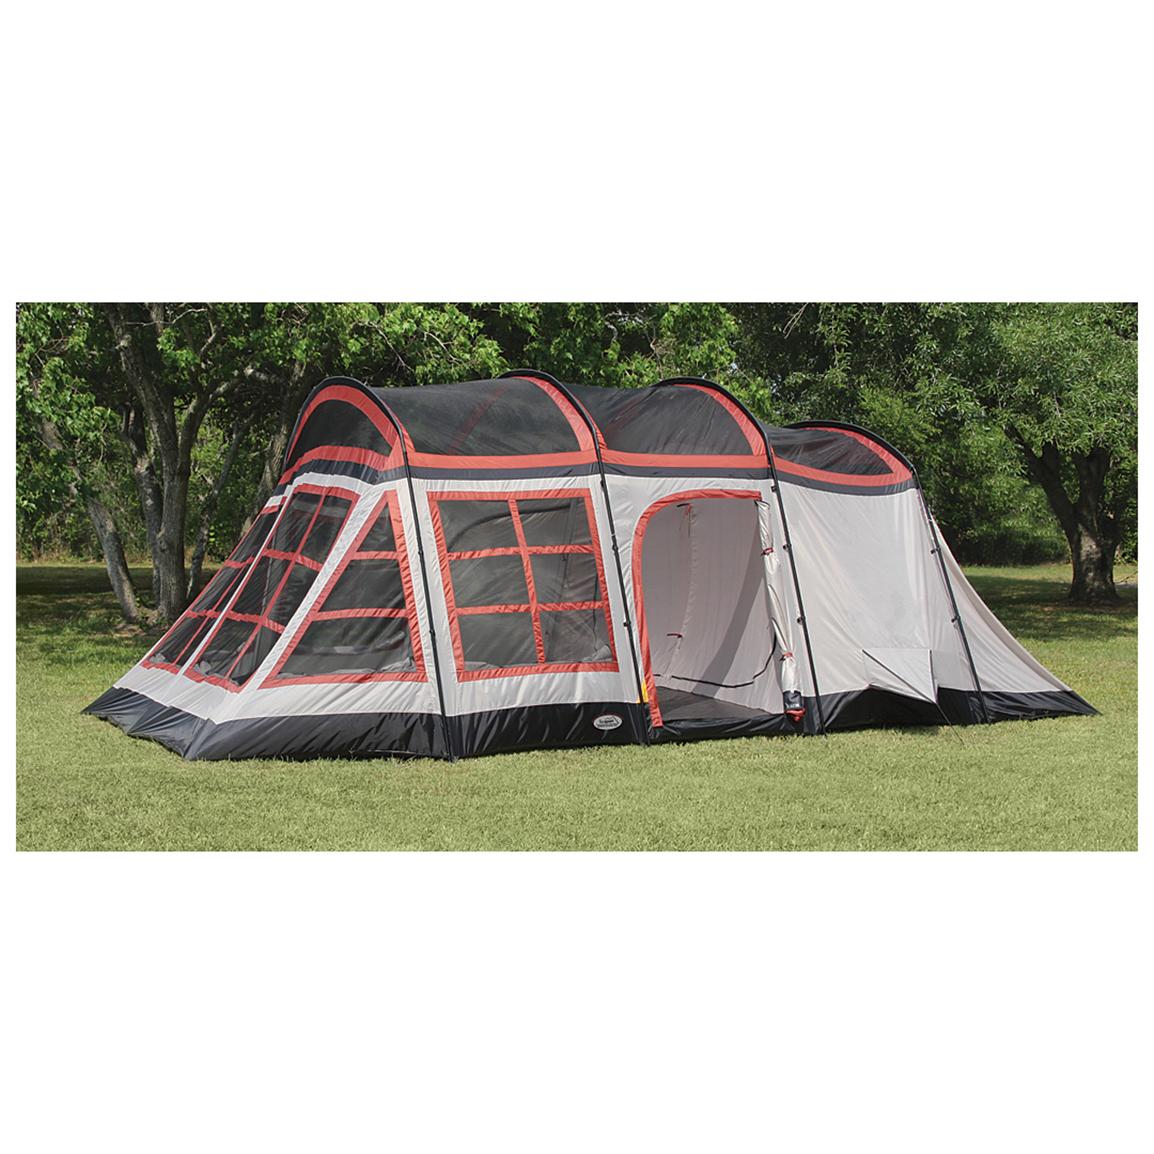 Texsport Big Horn 3-room Family Cabin Tent  Without rainfly